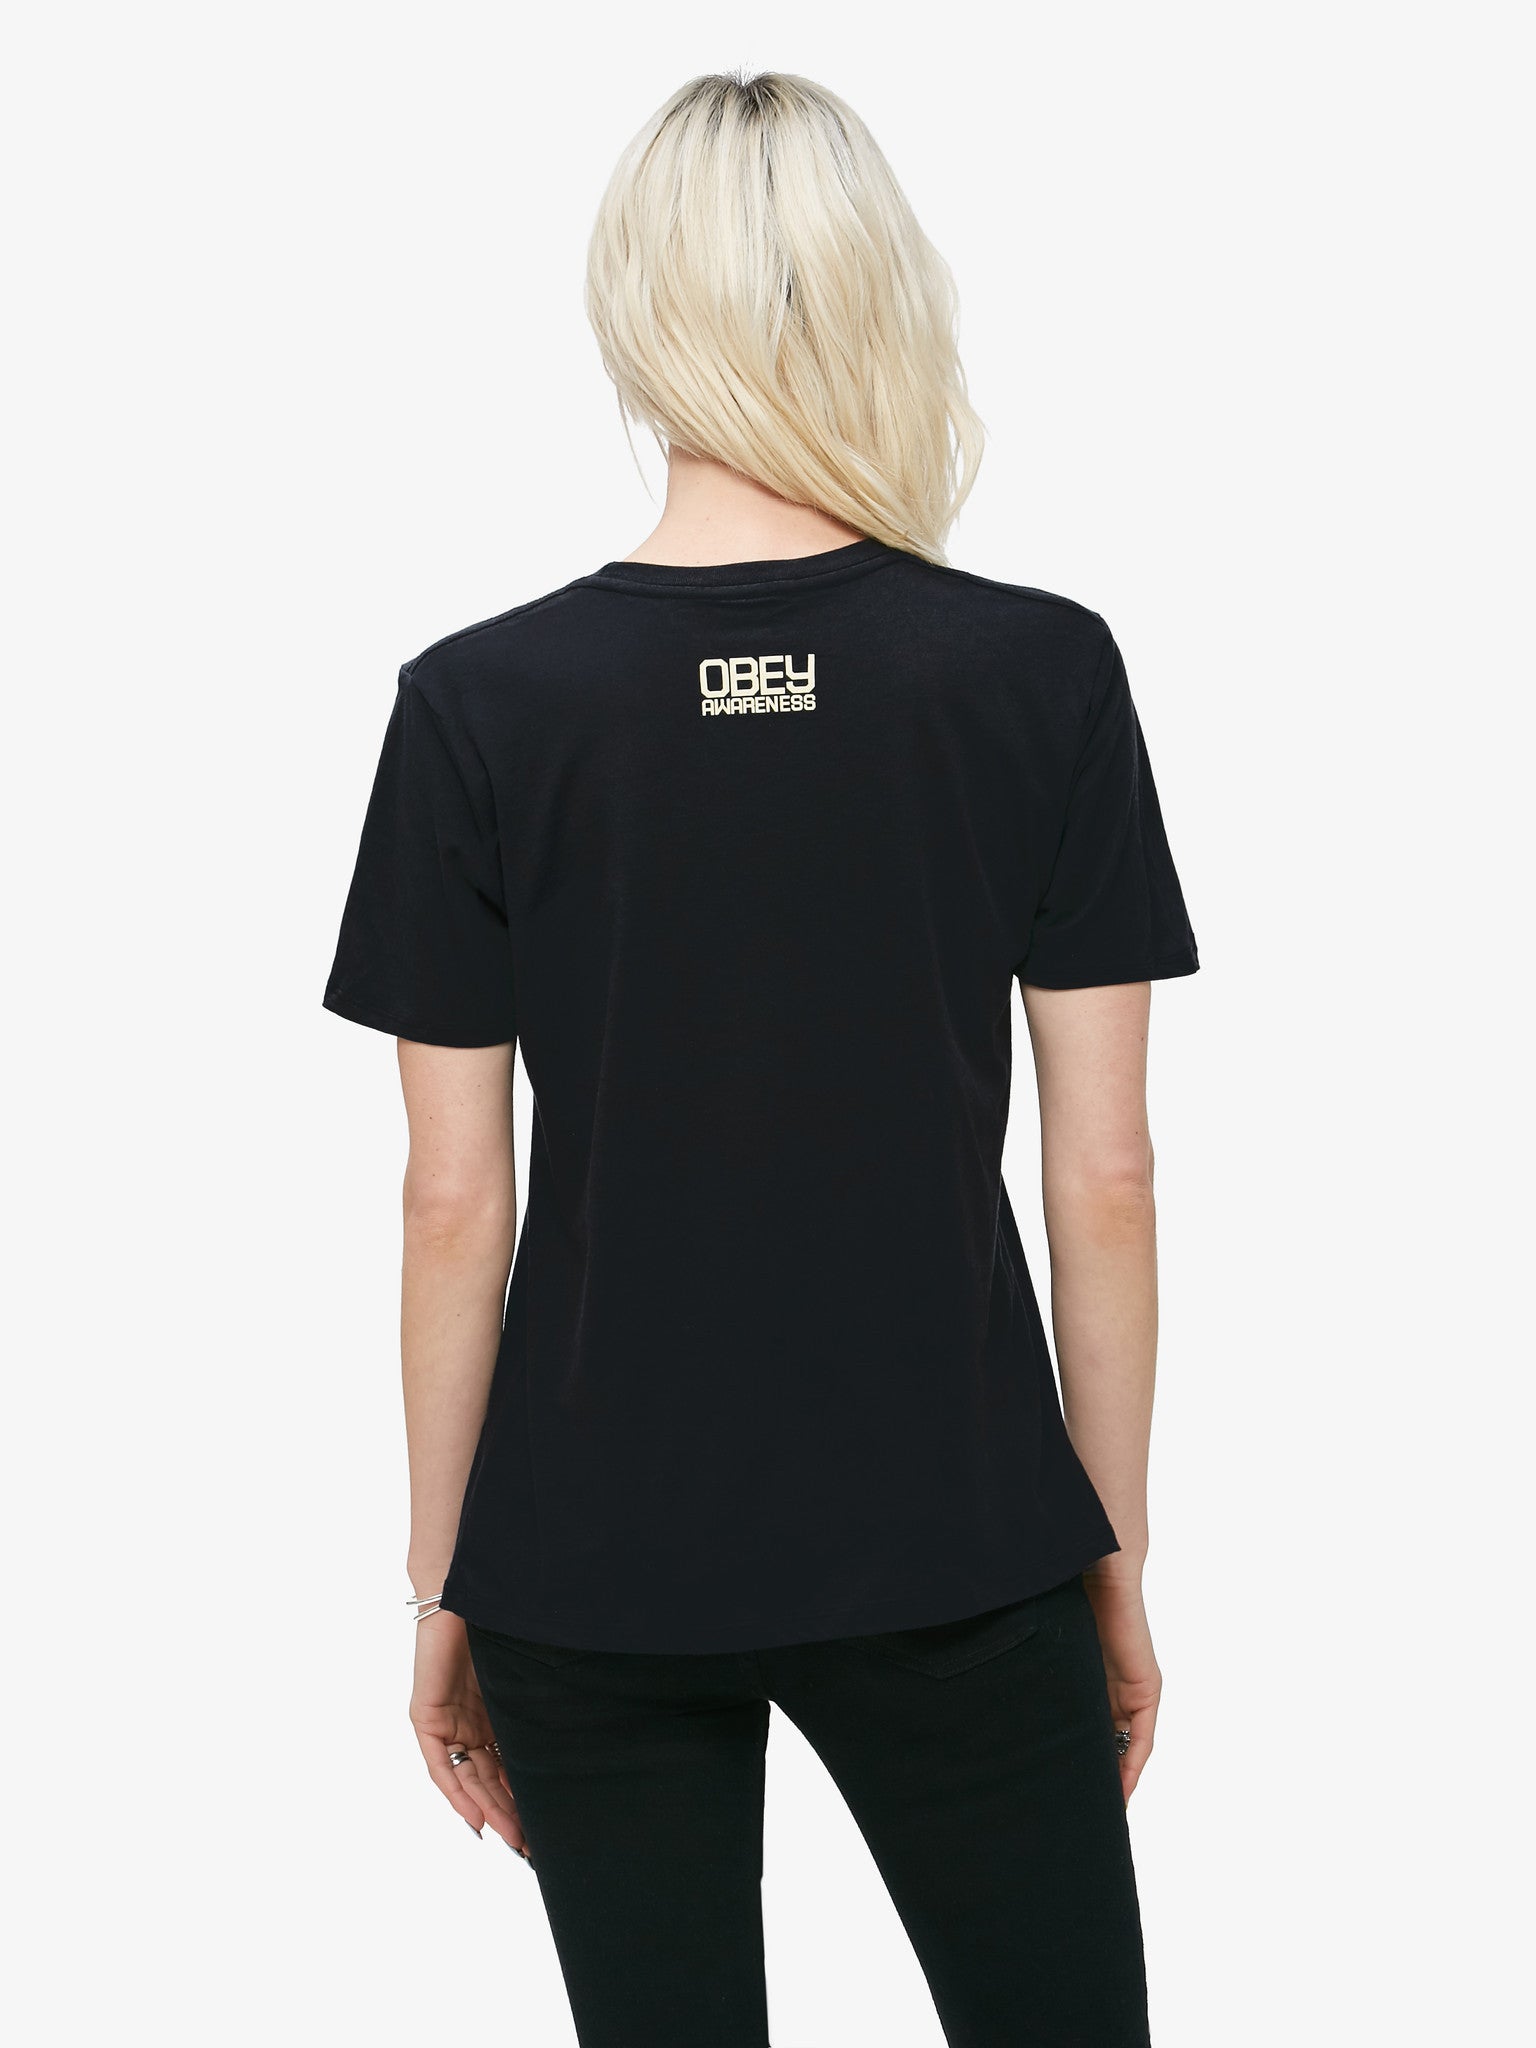 OBEY - Defend Dignity Women's Shirt, Black - The Giant Peach